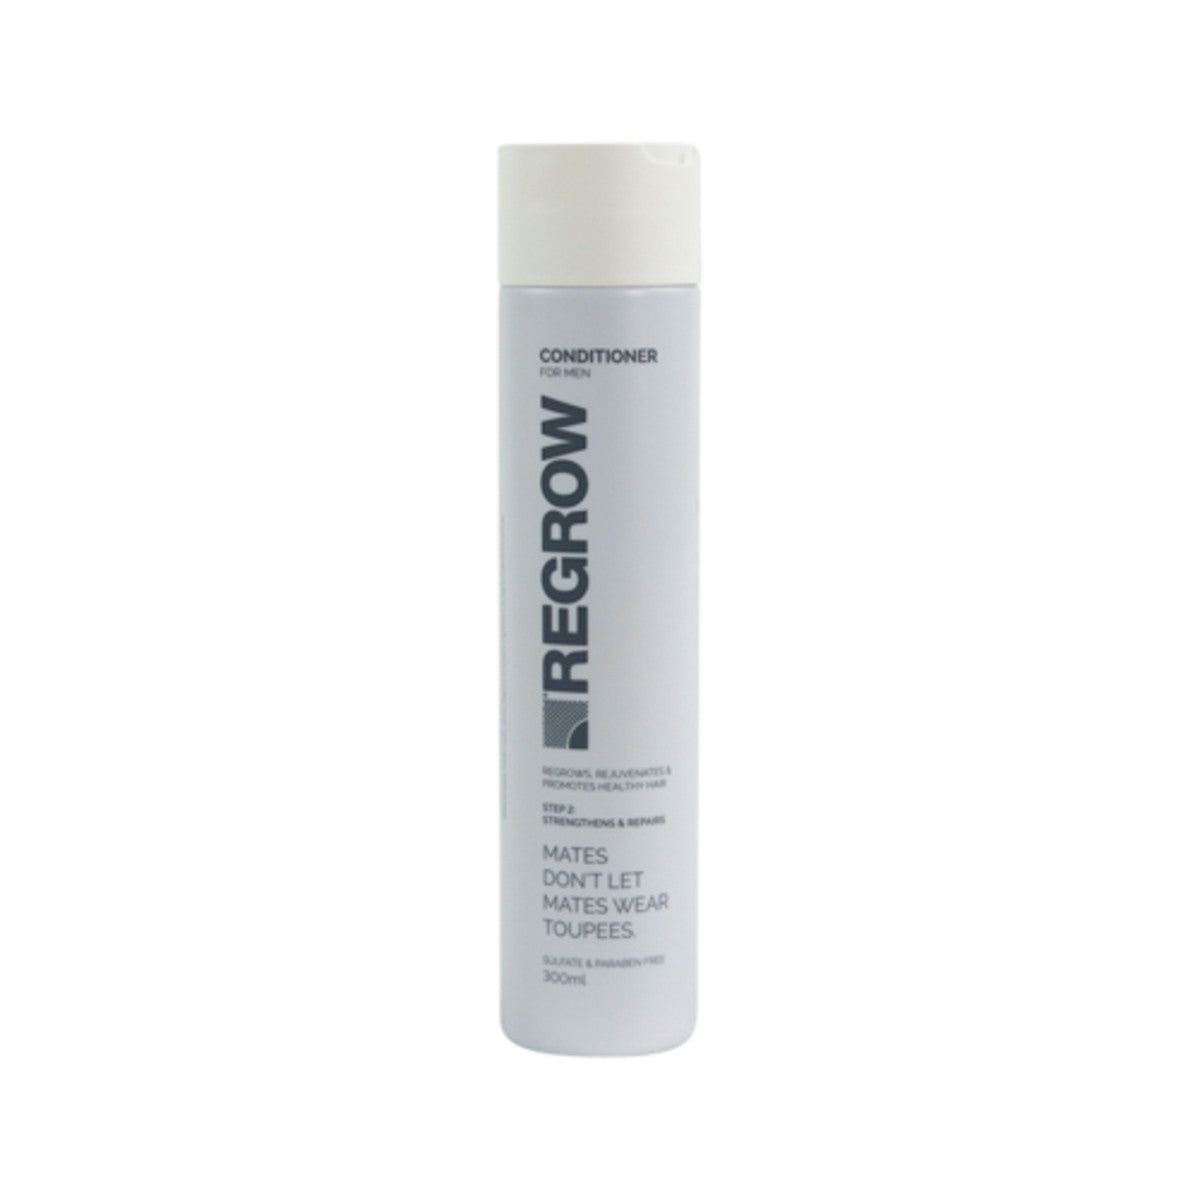 image of Regrow Hair Clinics Conditioner For Men (Strengthen & Repairs) 300ml on white background 